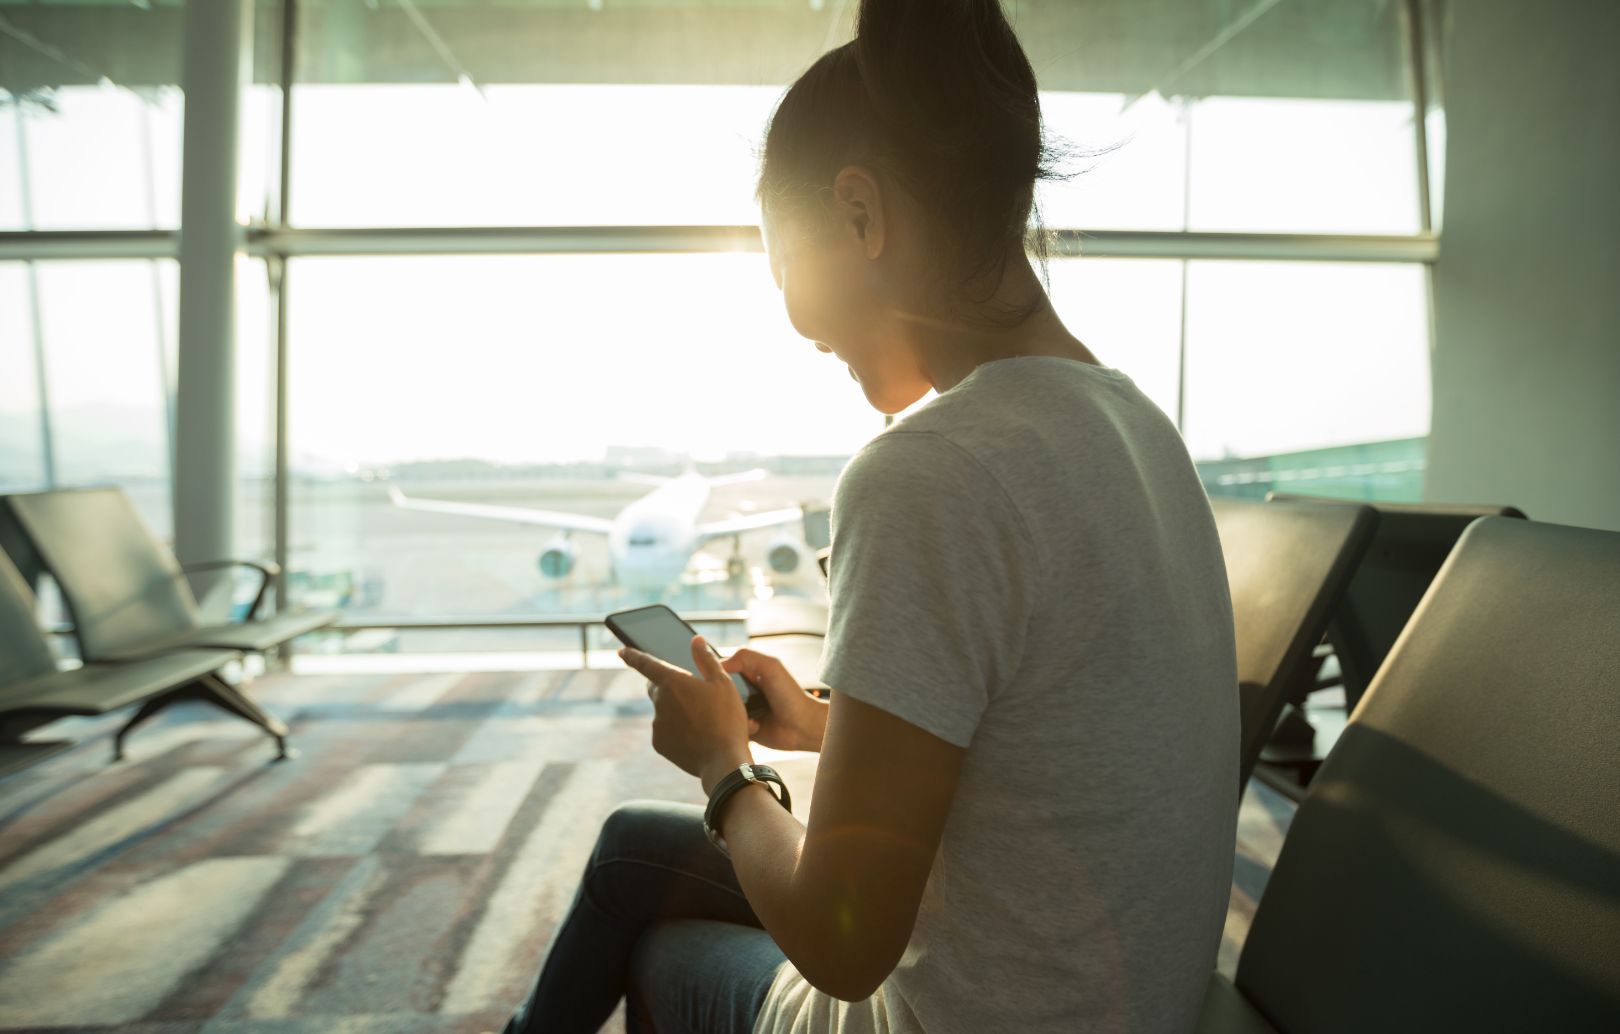 6 Ways To Entertain Yourself at the Airport